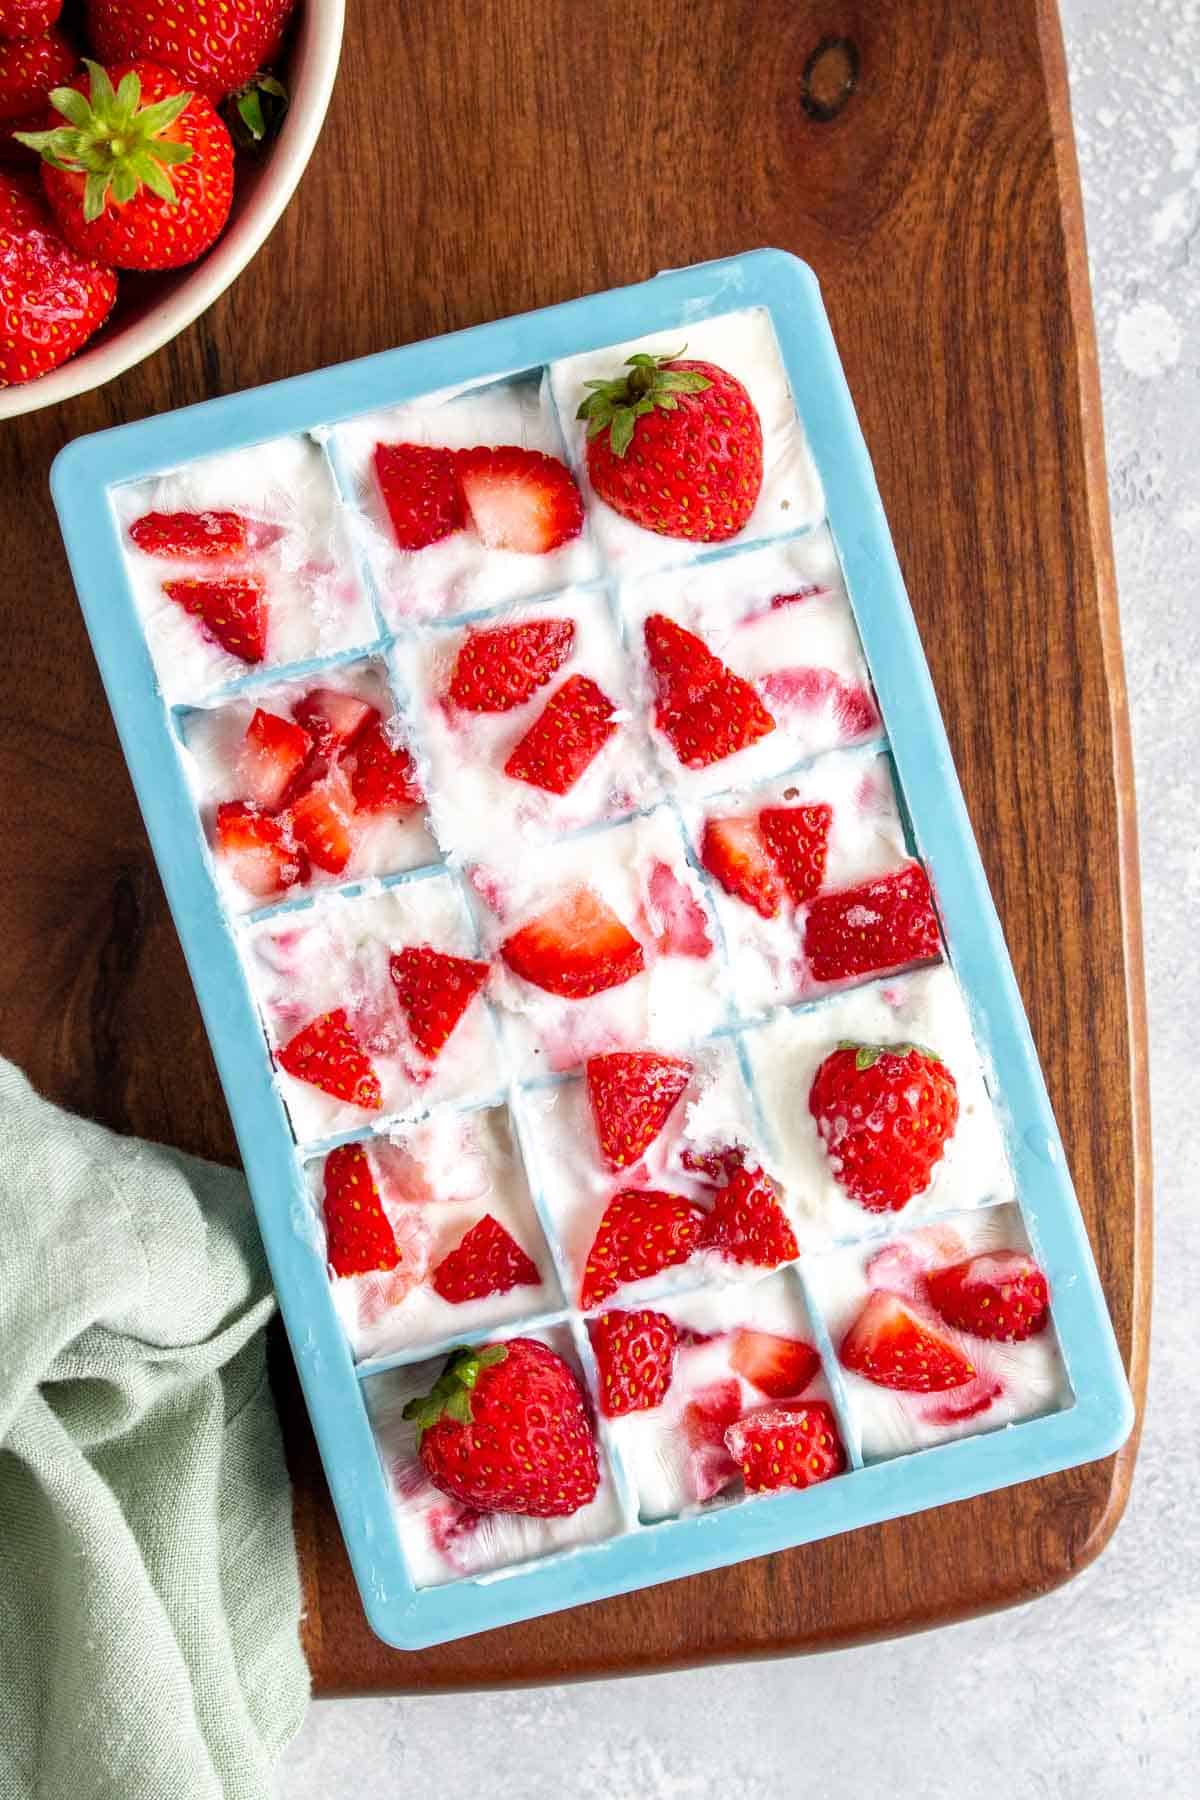 An ice cube tray filled with frozen strawberry yogurt cubes.